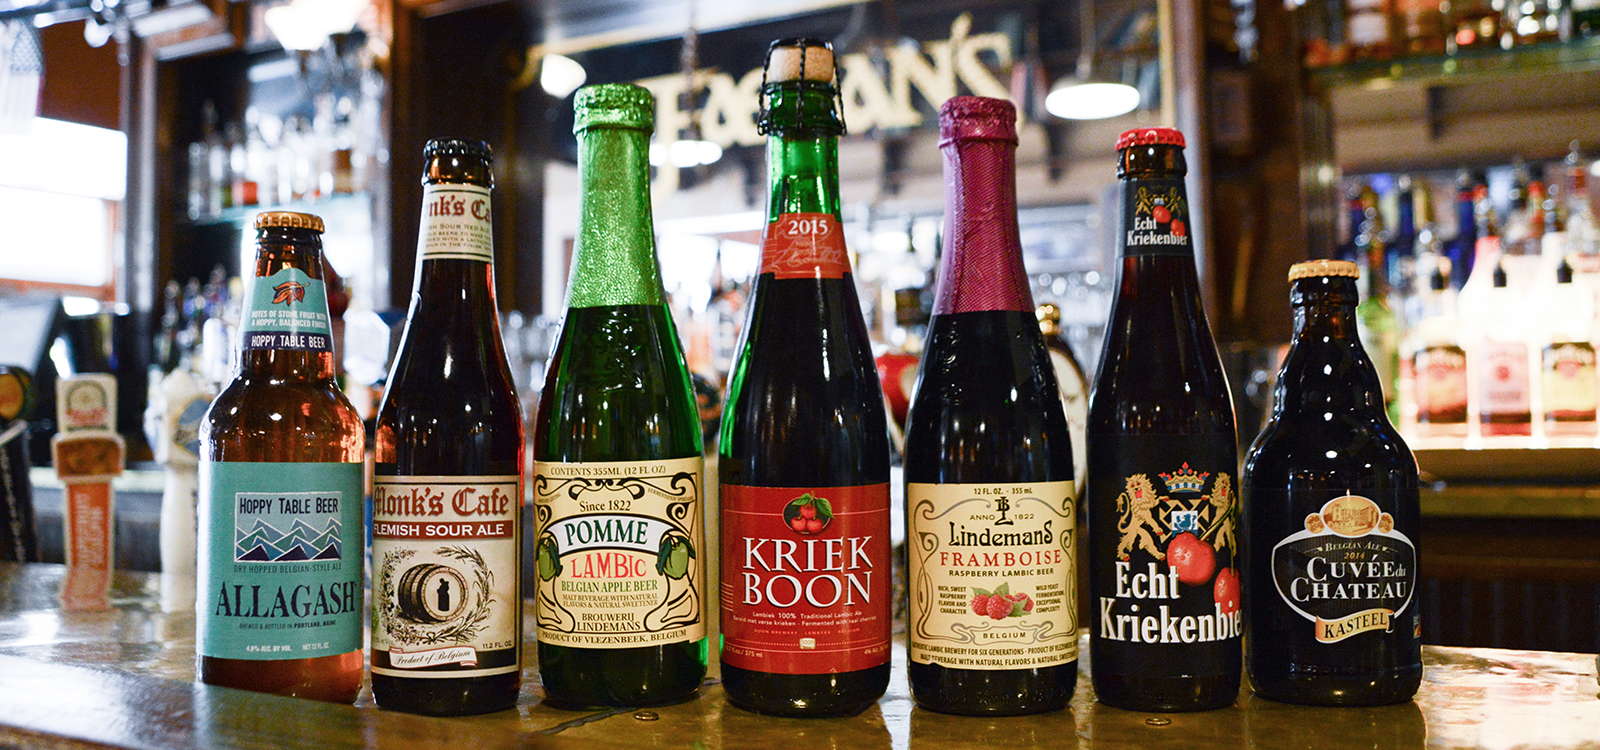 7 lambic beer bottles on a bar